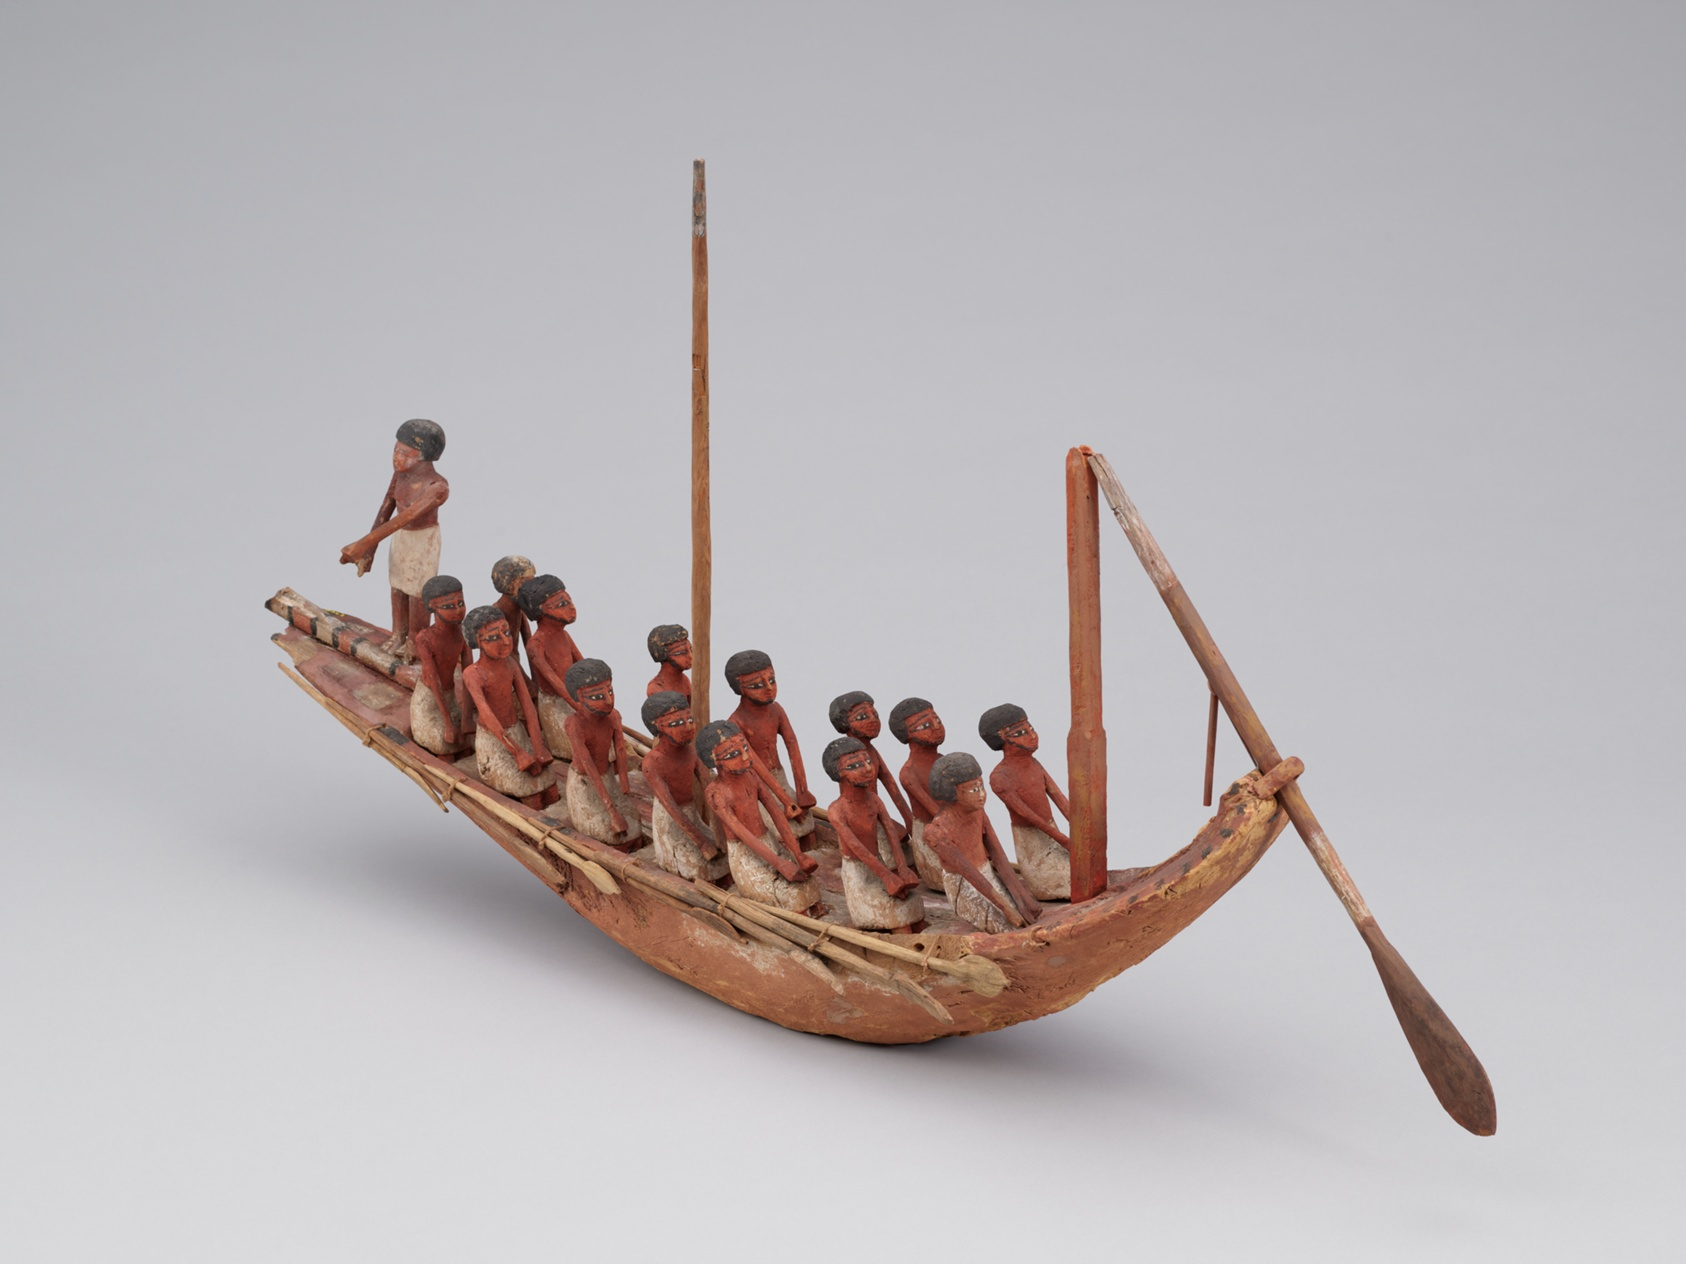 A painted wooden boat with 15 wooden figures, all painted with white cloth around their lower halves. Fourteen figures are seated as if rowing; one figures stands facing sideways at the back of the boat.